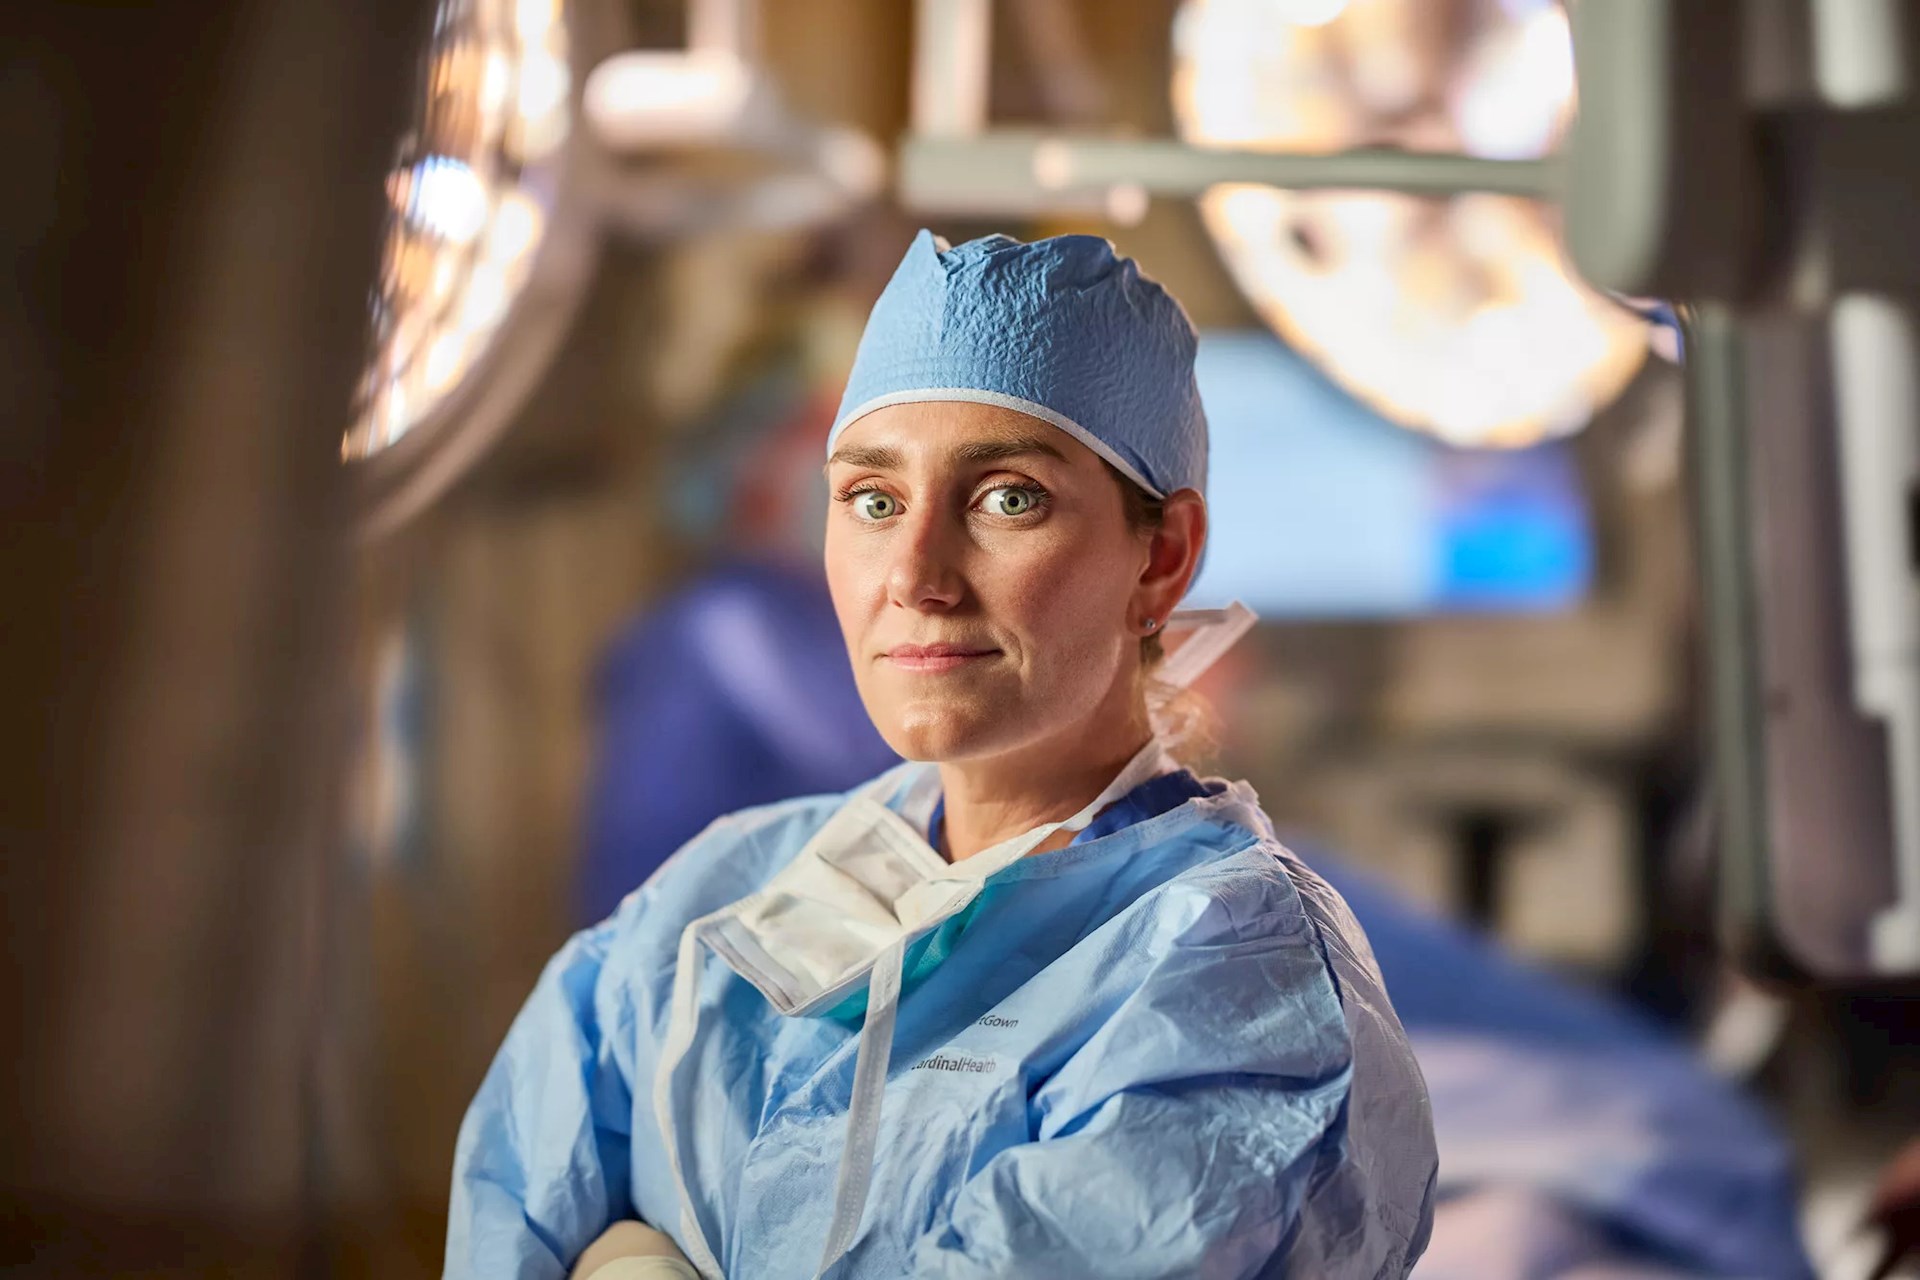 Dr. Jaime Slotkin is among the WellSpan breast surgeons who offer oncoplasty to patients. This emerging specialty combines the strengths of breast surgery and plastic surgery.